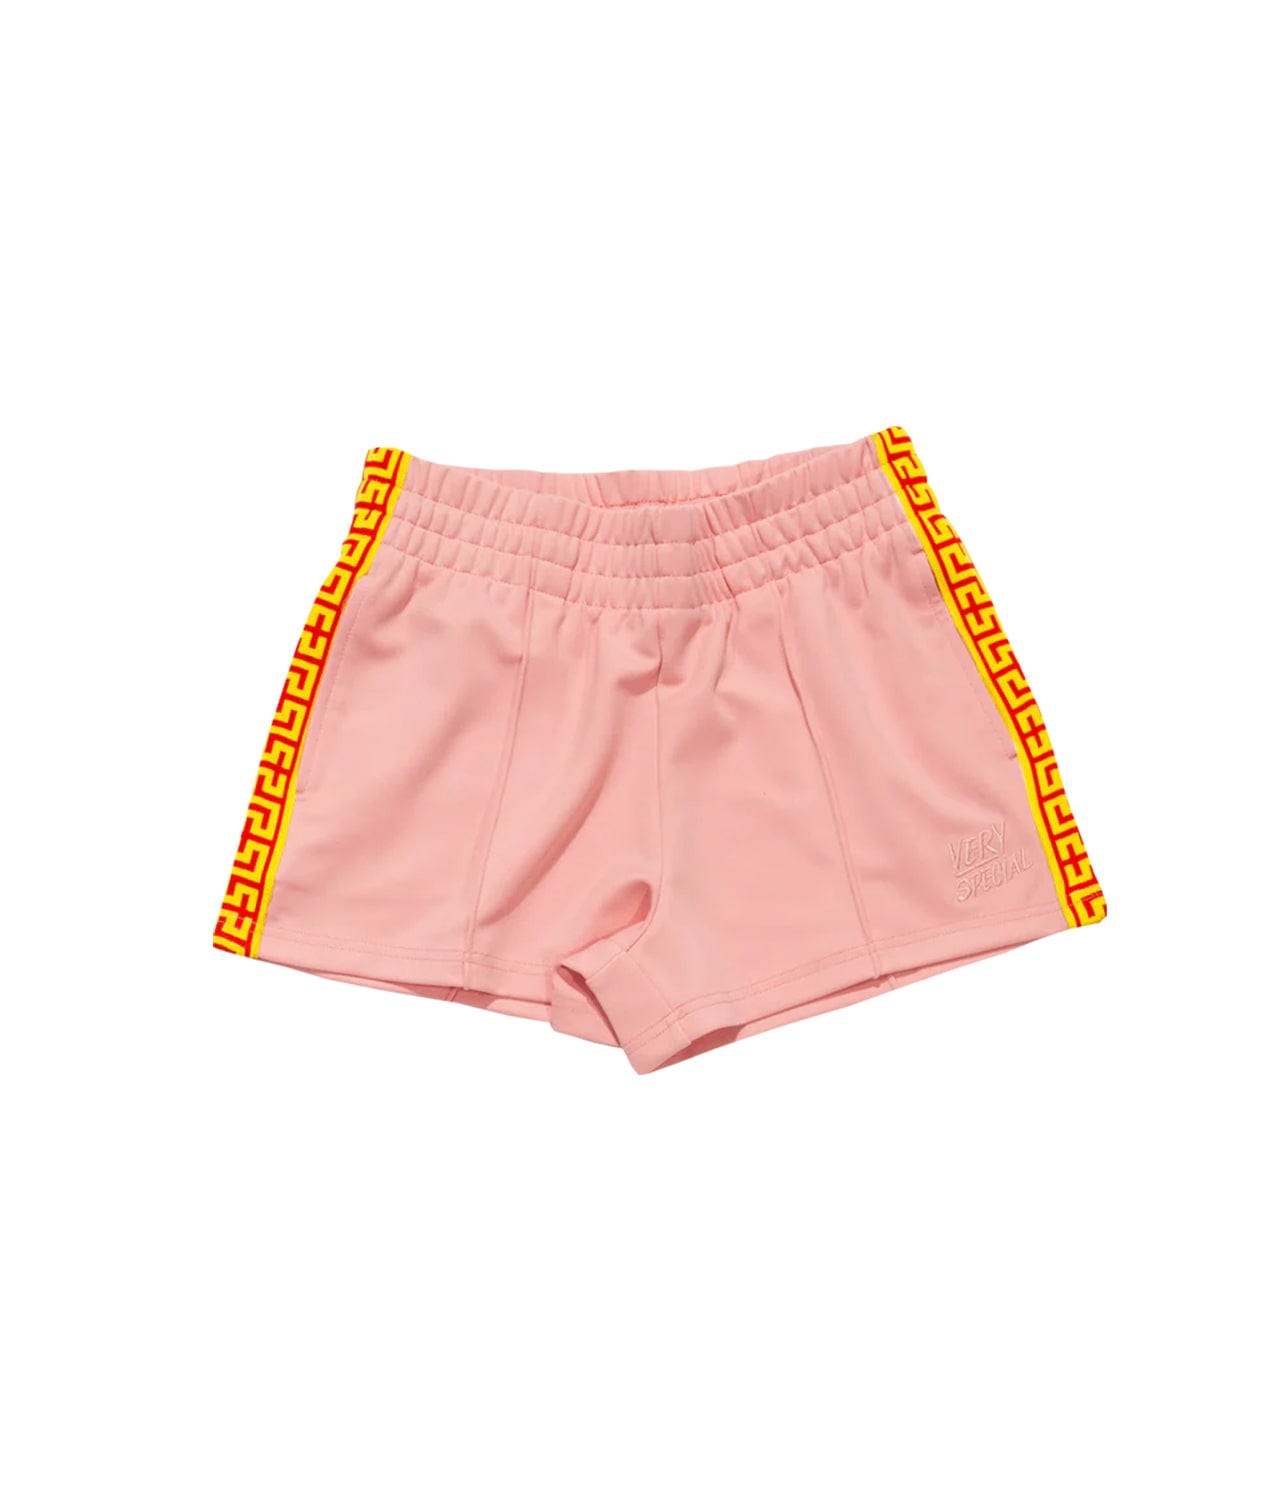 GEO TRACK SHORT- PINK | SOMETHING VERY SPECIAL |  SOMETHING VERY SPECIAL GEO TRACK SHORT- PINK